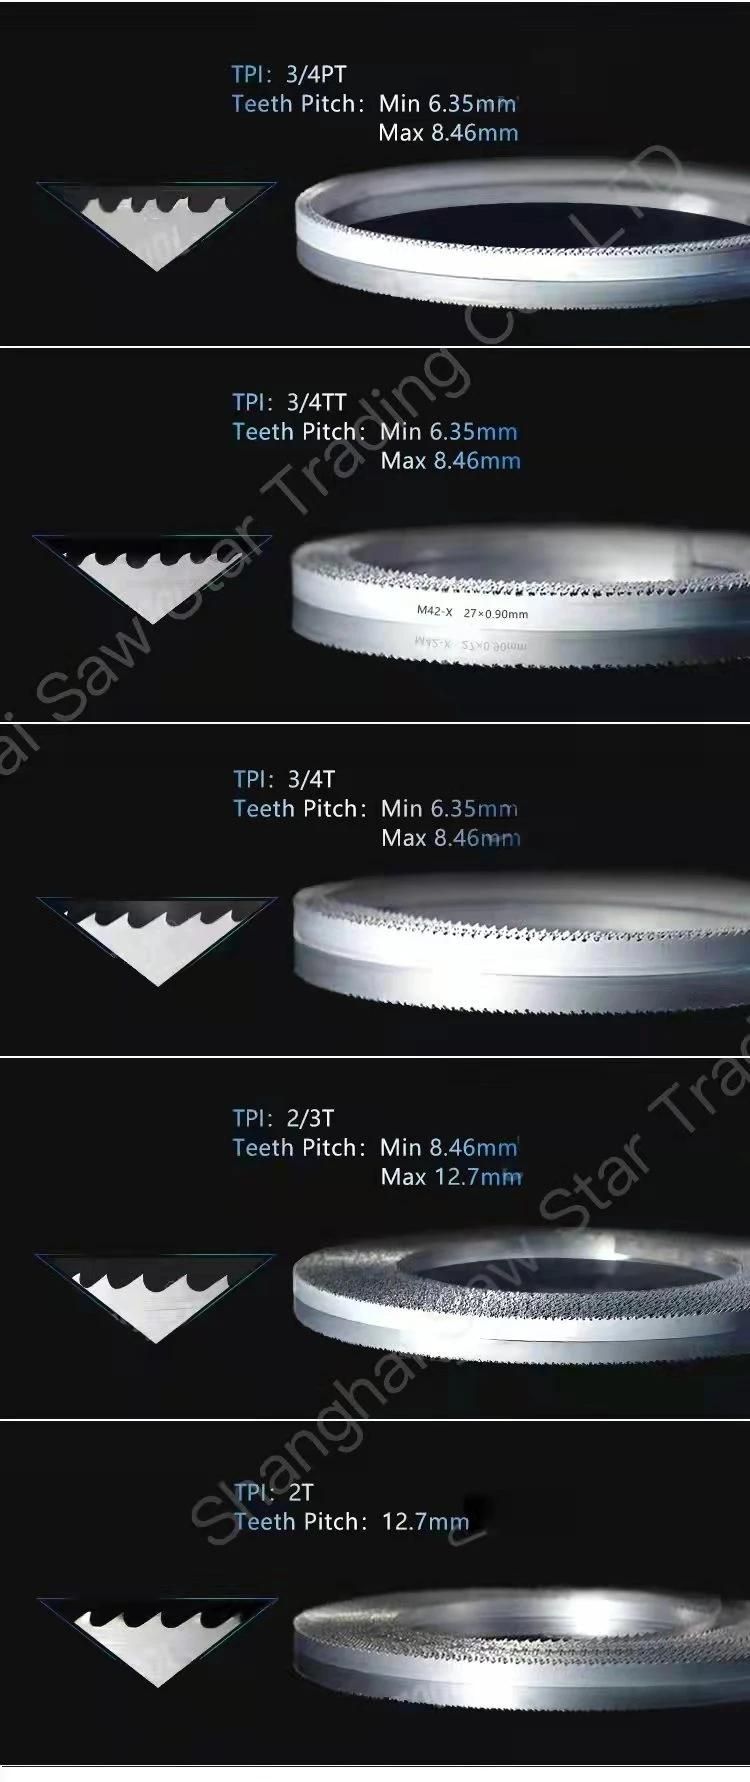 34mm * 1.1mm * 4560mm* 3/4 Tooth Saw Blade for Cutting The Best Quality